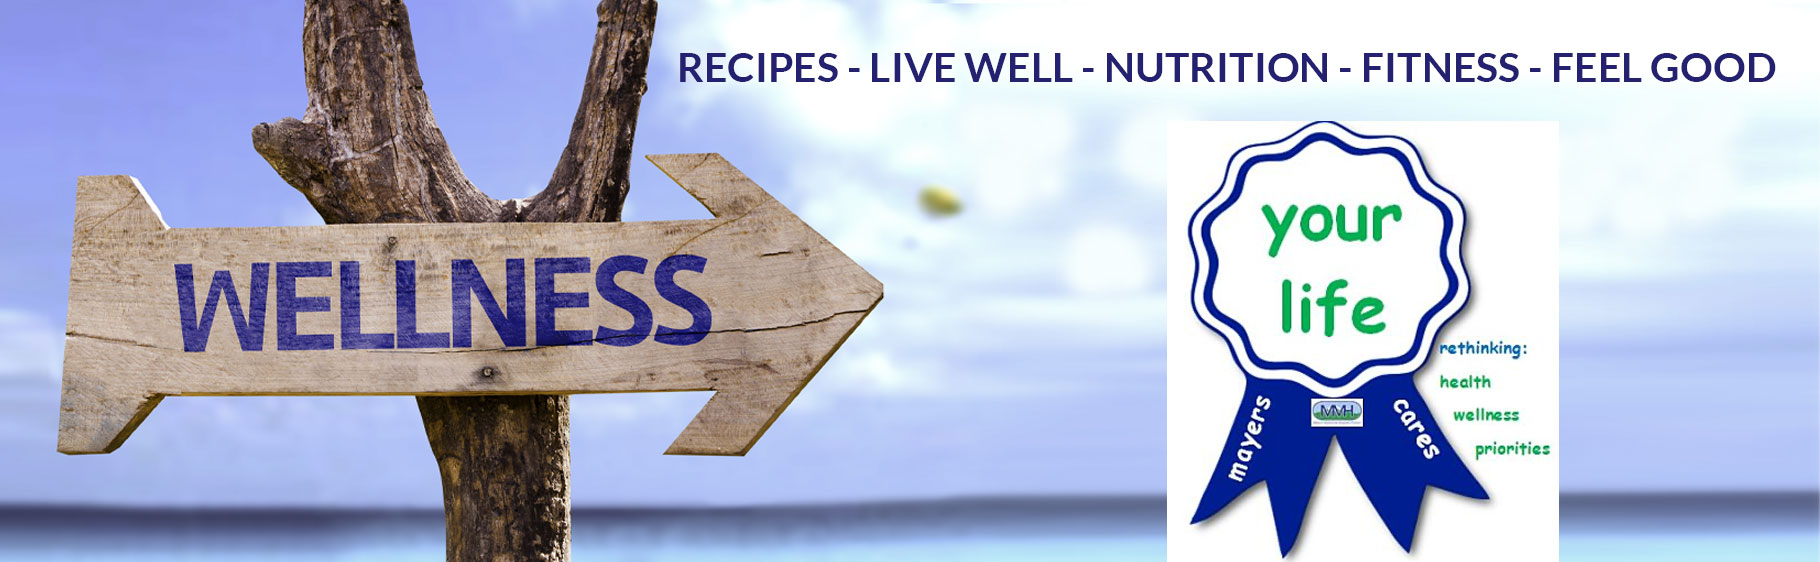 Wellness
RECIPES-LIVE WELL- NUTRITION- FITNESS- FEEL GOOD

Your Life
rethinking:
health
wellness
priorities

mayers cares